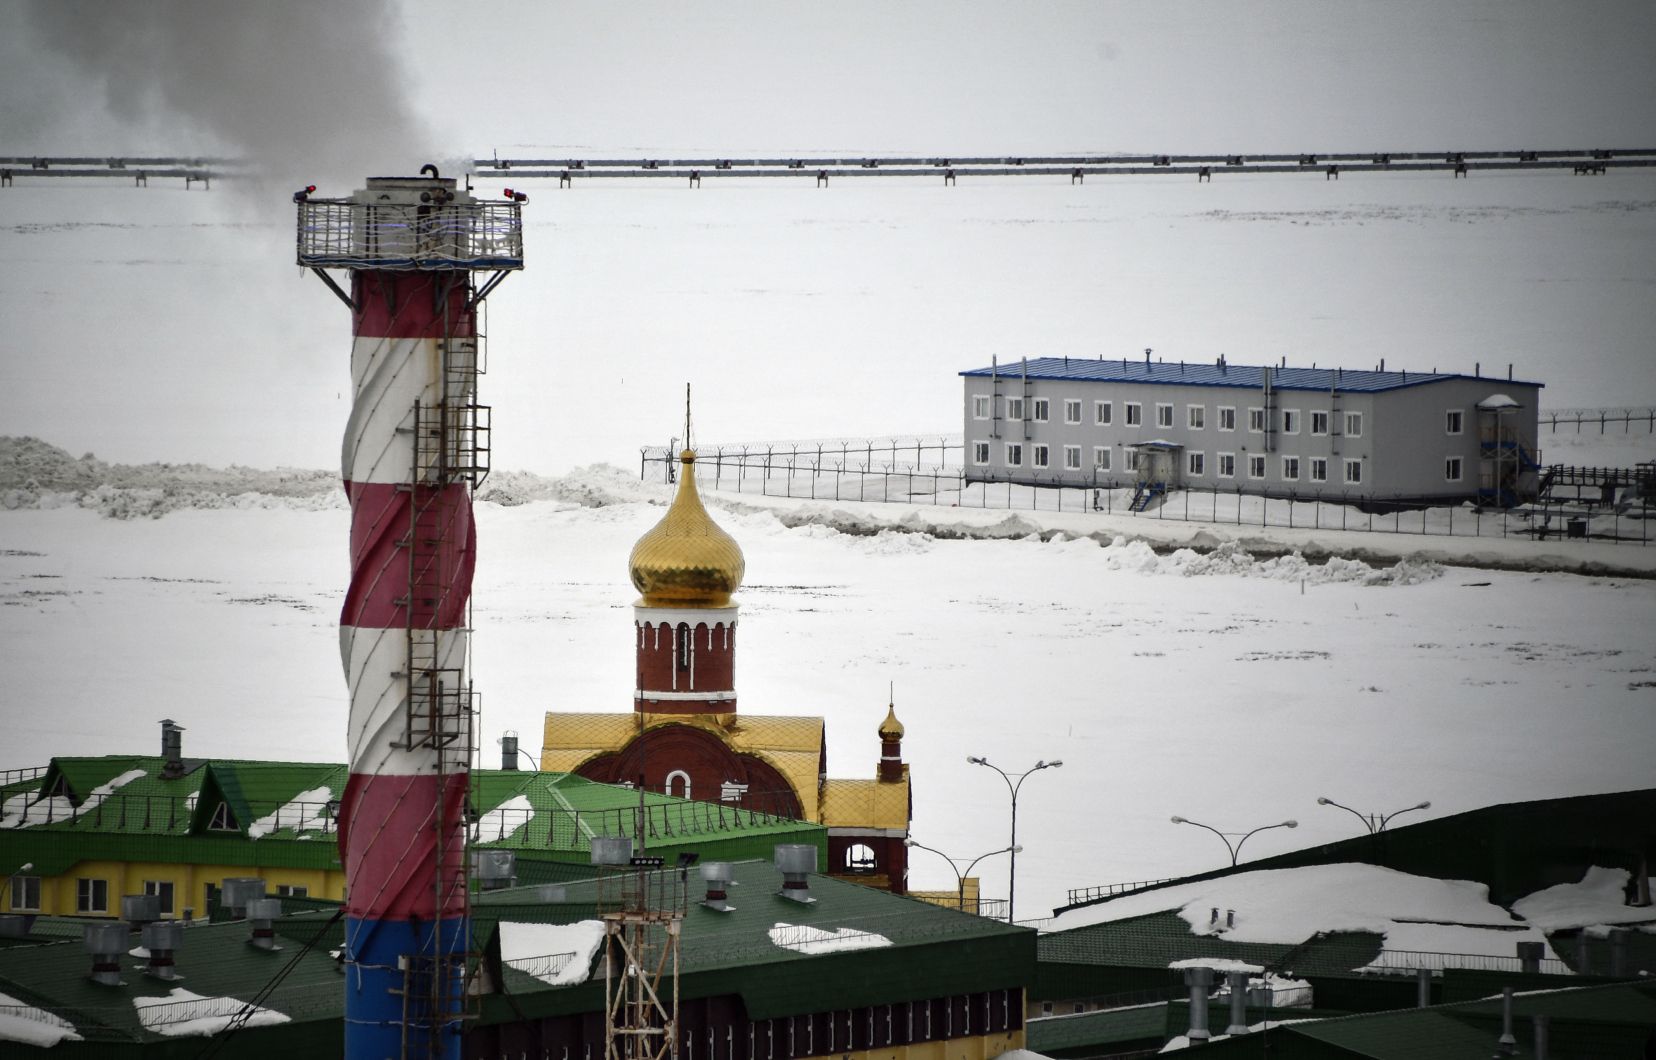 Canada's green virtues countered Russia's economic ambitions in the Arctic

